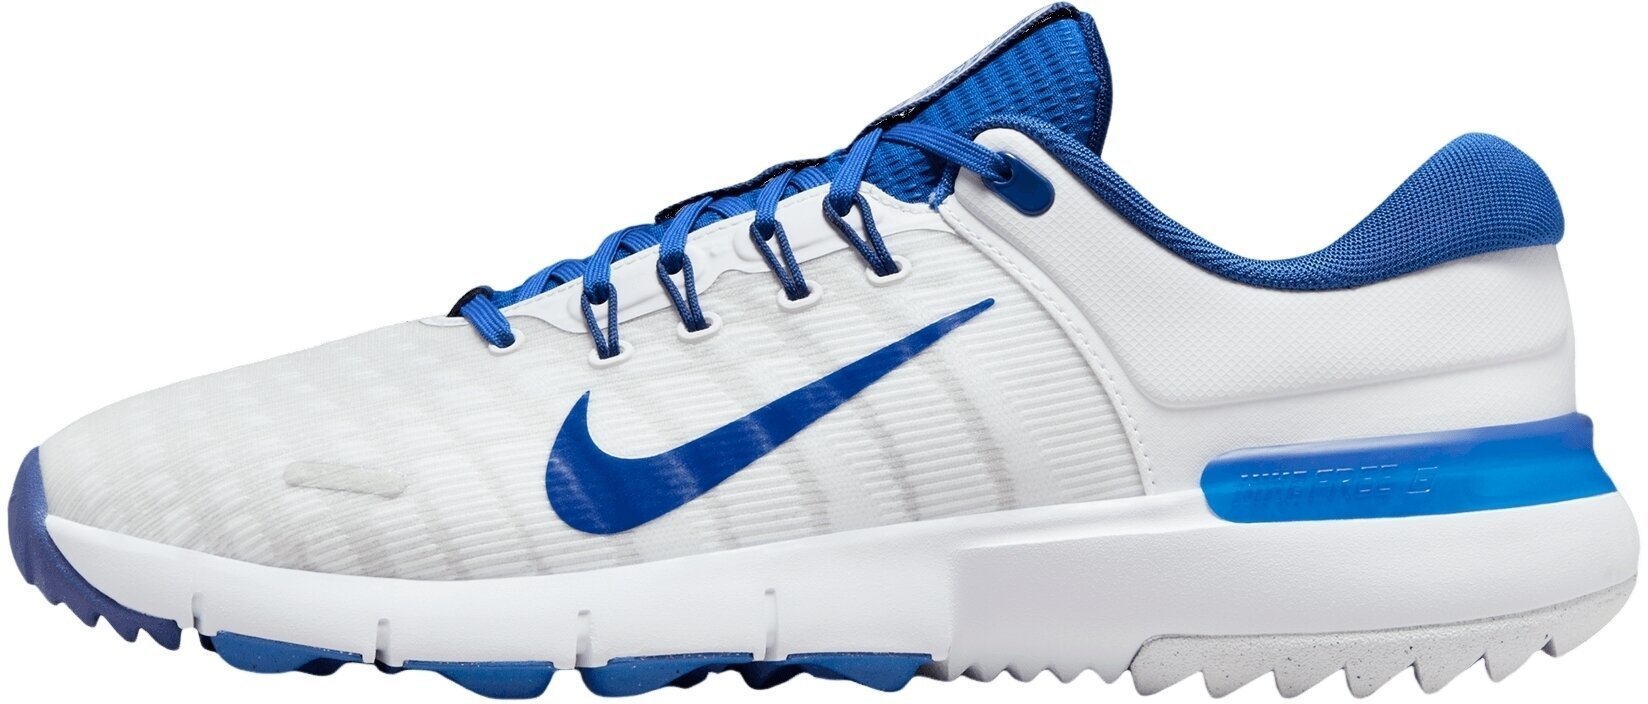 Chaussures de golf pour hommes Nike Free Golf Unisex Shoes Game Royal/Deep Royal Blue/Football Grey 45